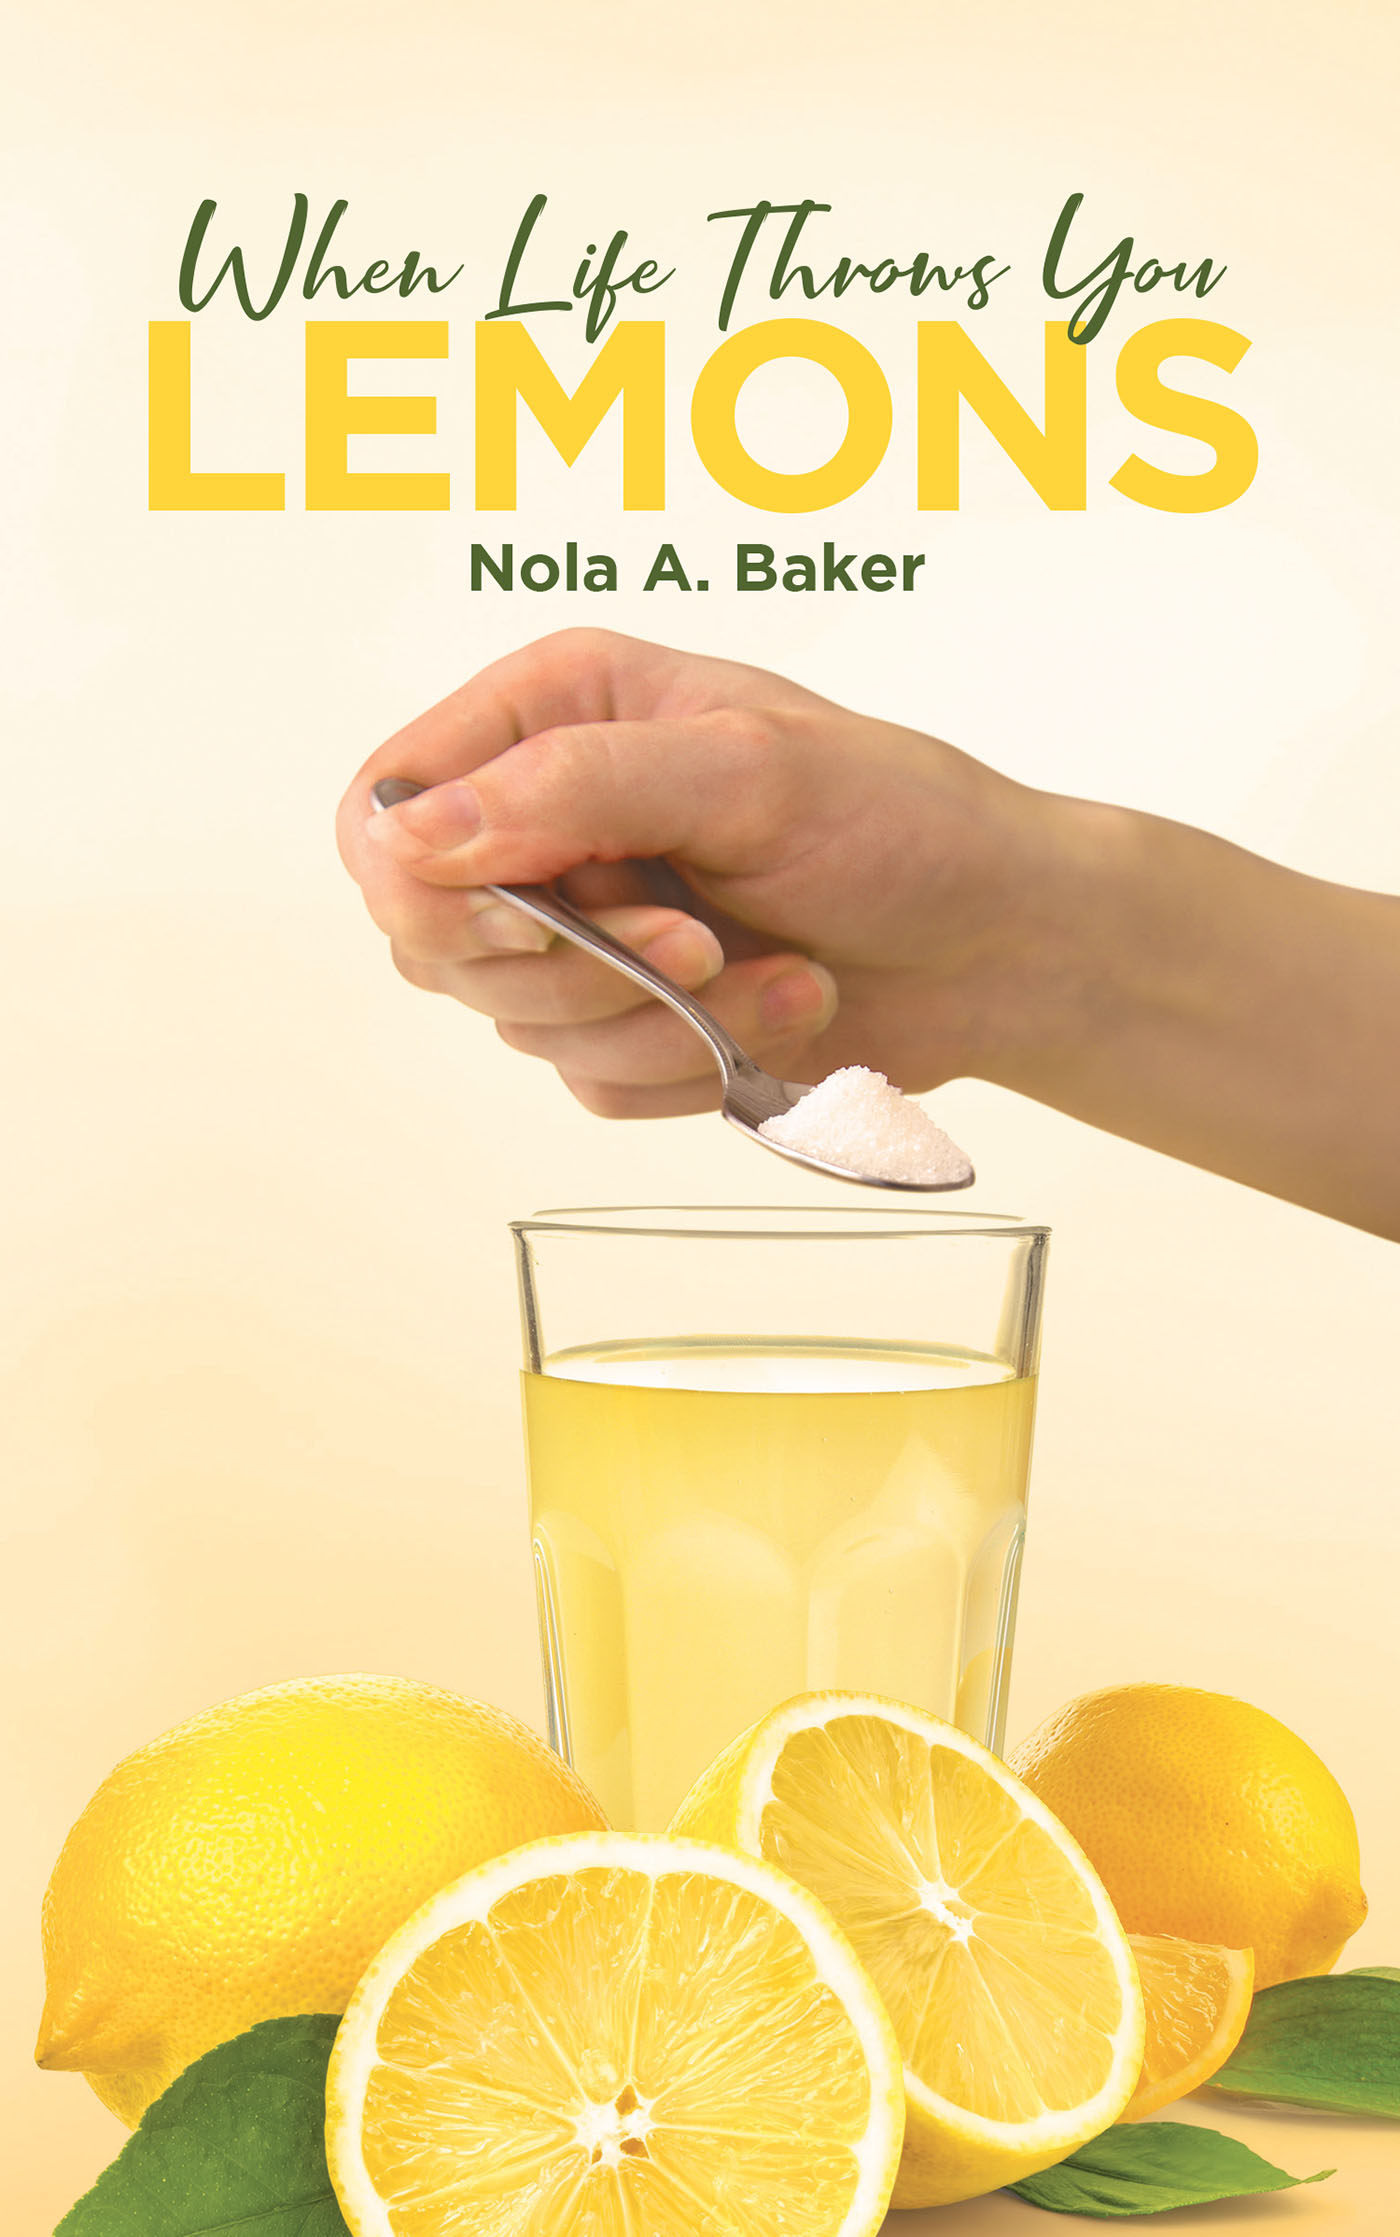 Author Nola A. Baker’s New Book, "When Life Throws You Lemons," is an Incredible Testimony of One Woman’s Indomitable Faith, Which Helped Her Triumph Against the Odds